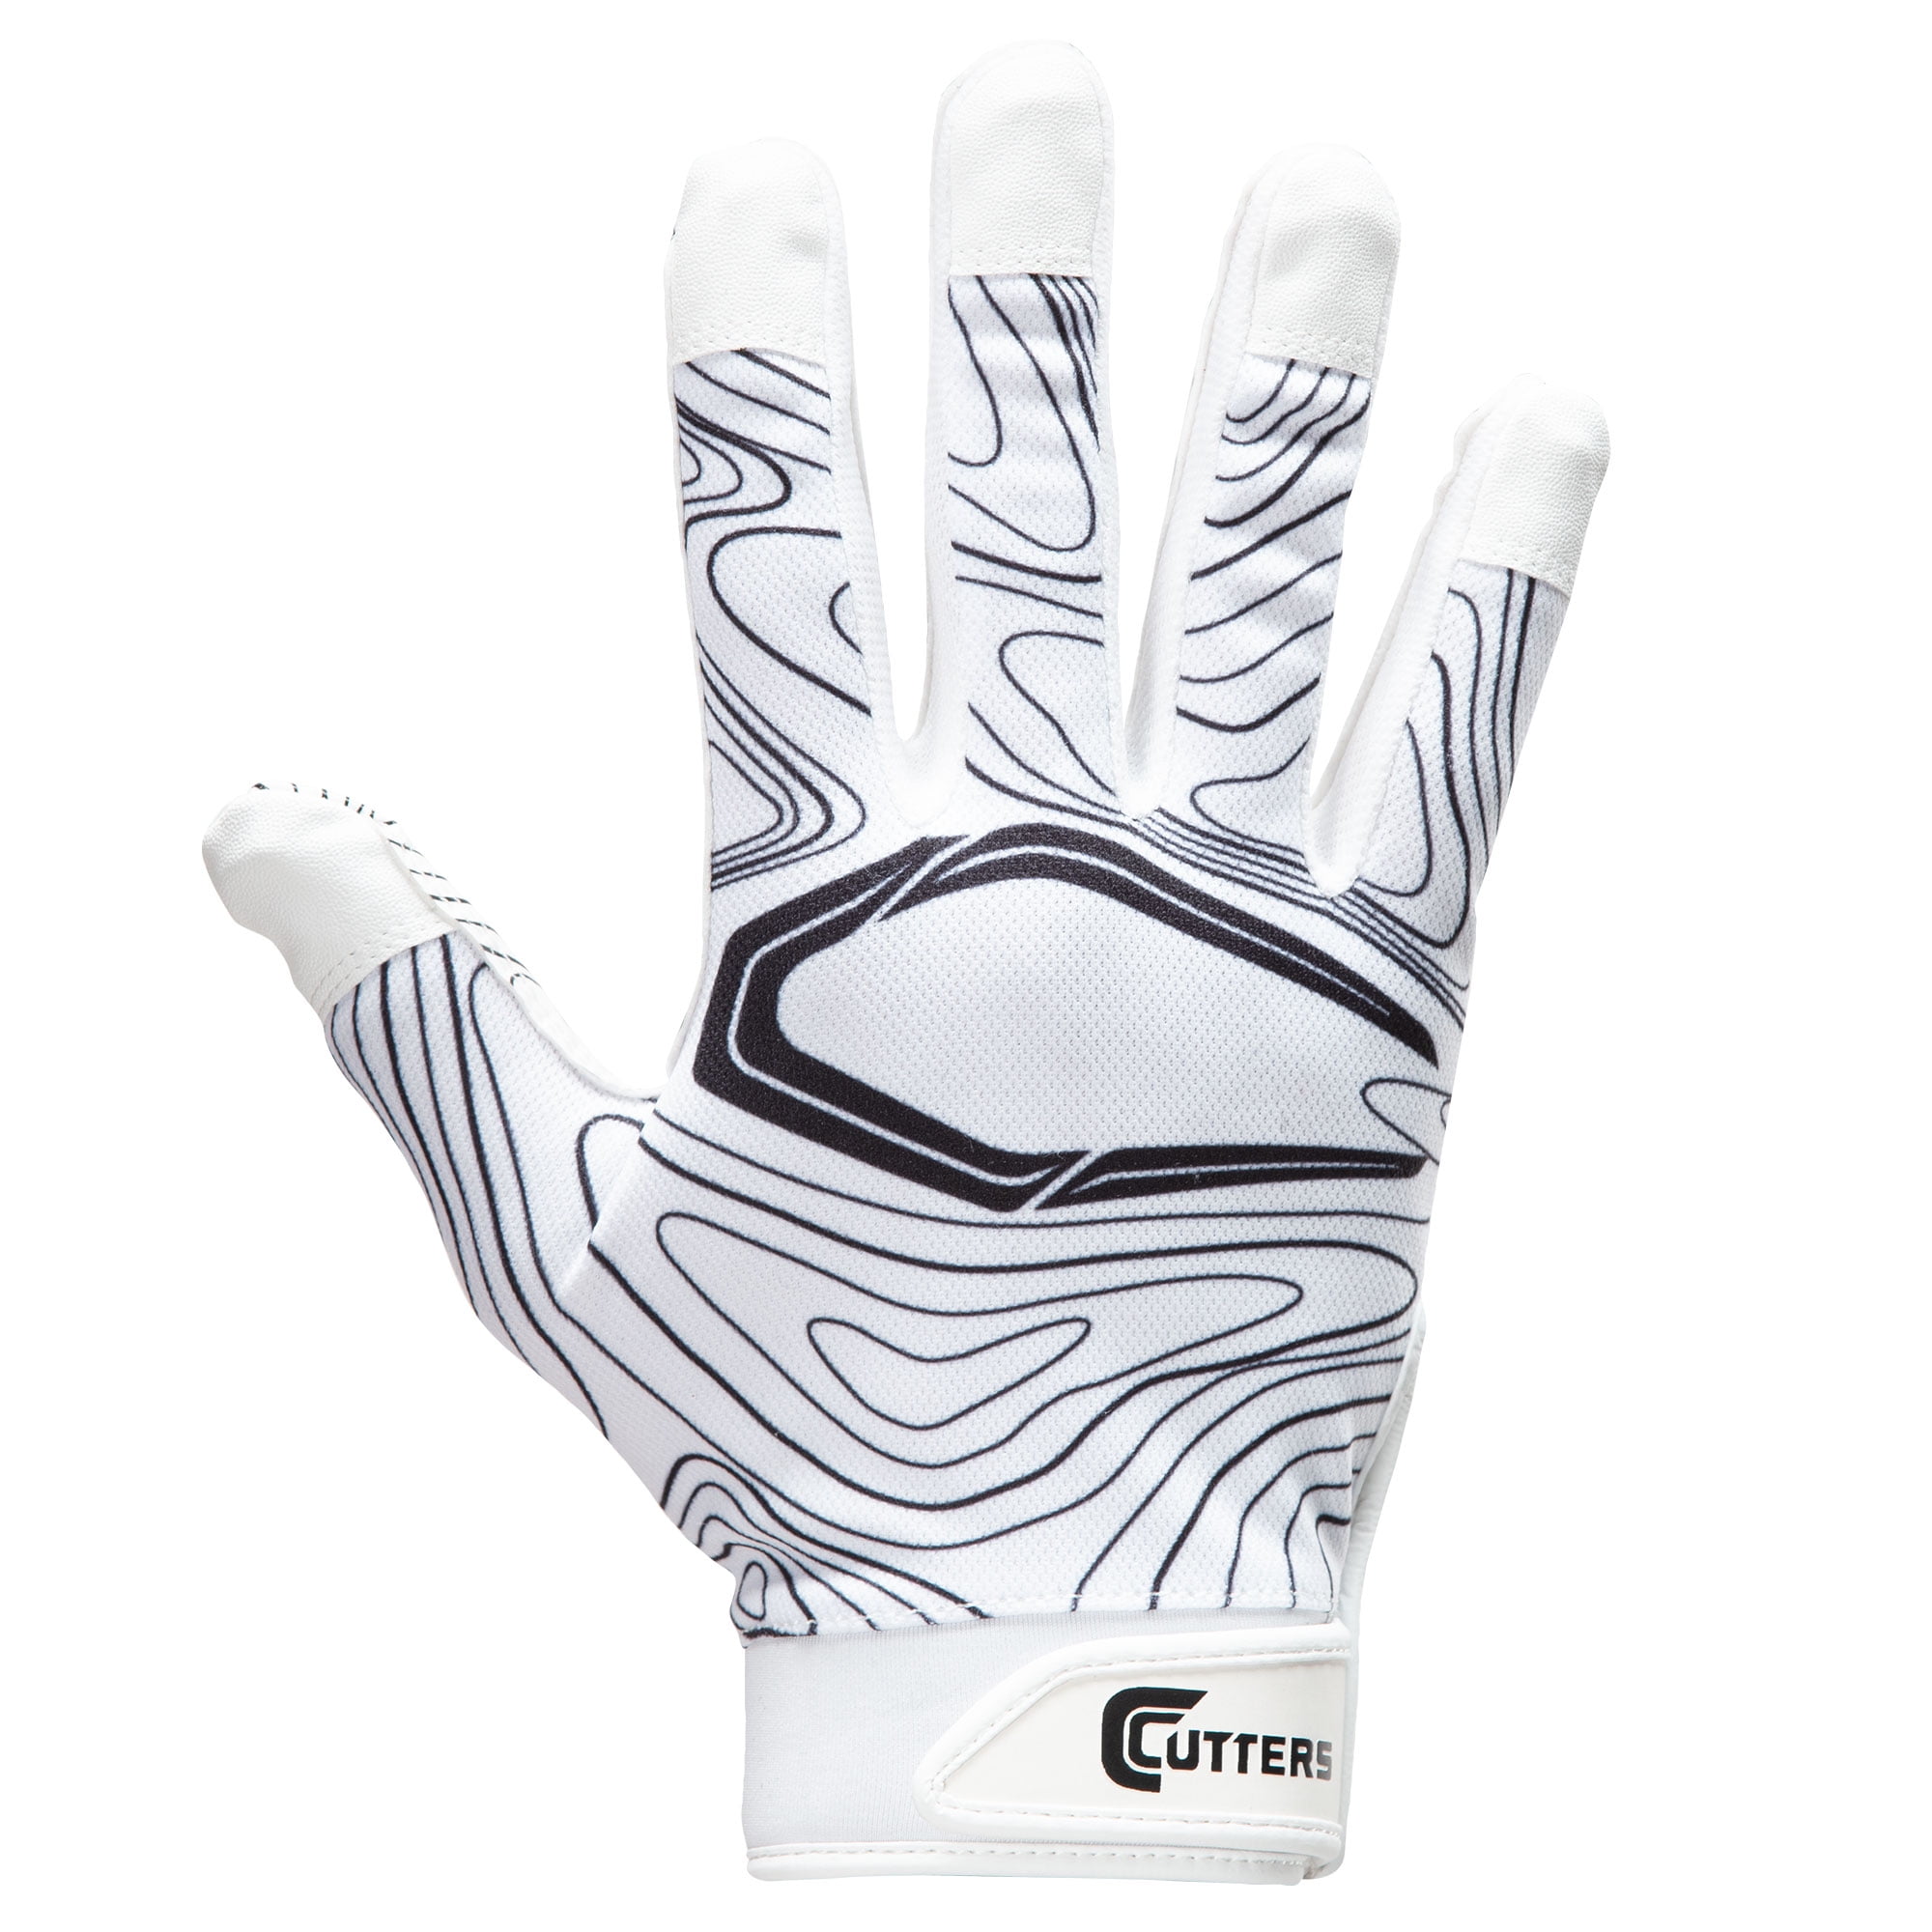 Cutters REV 3.0 Receiver Gloves White Gray Palm Print Ultimate Grip Adult Youth 